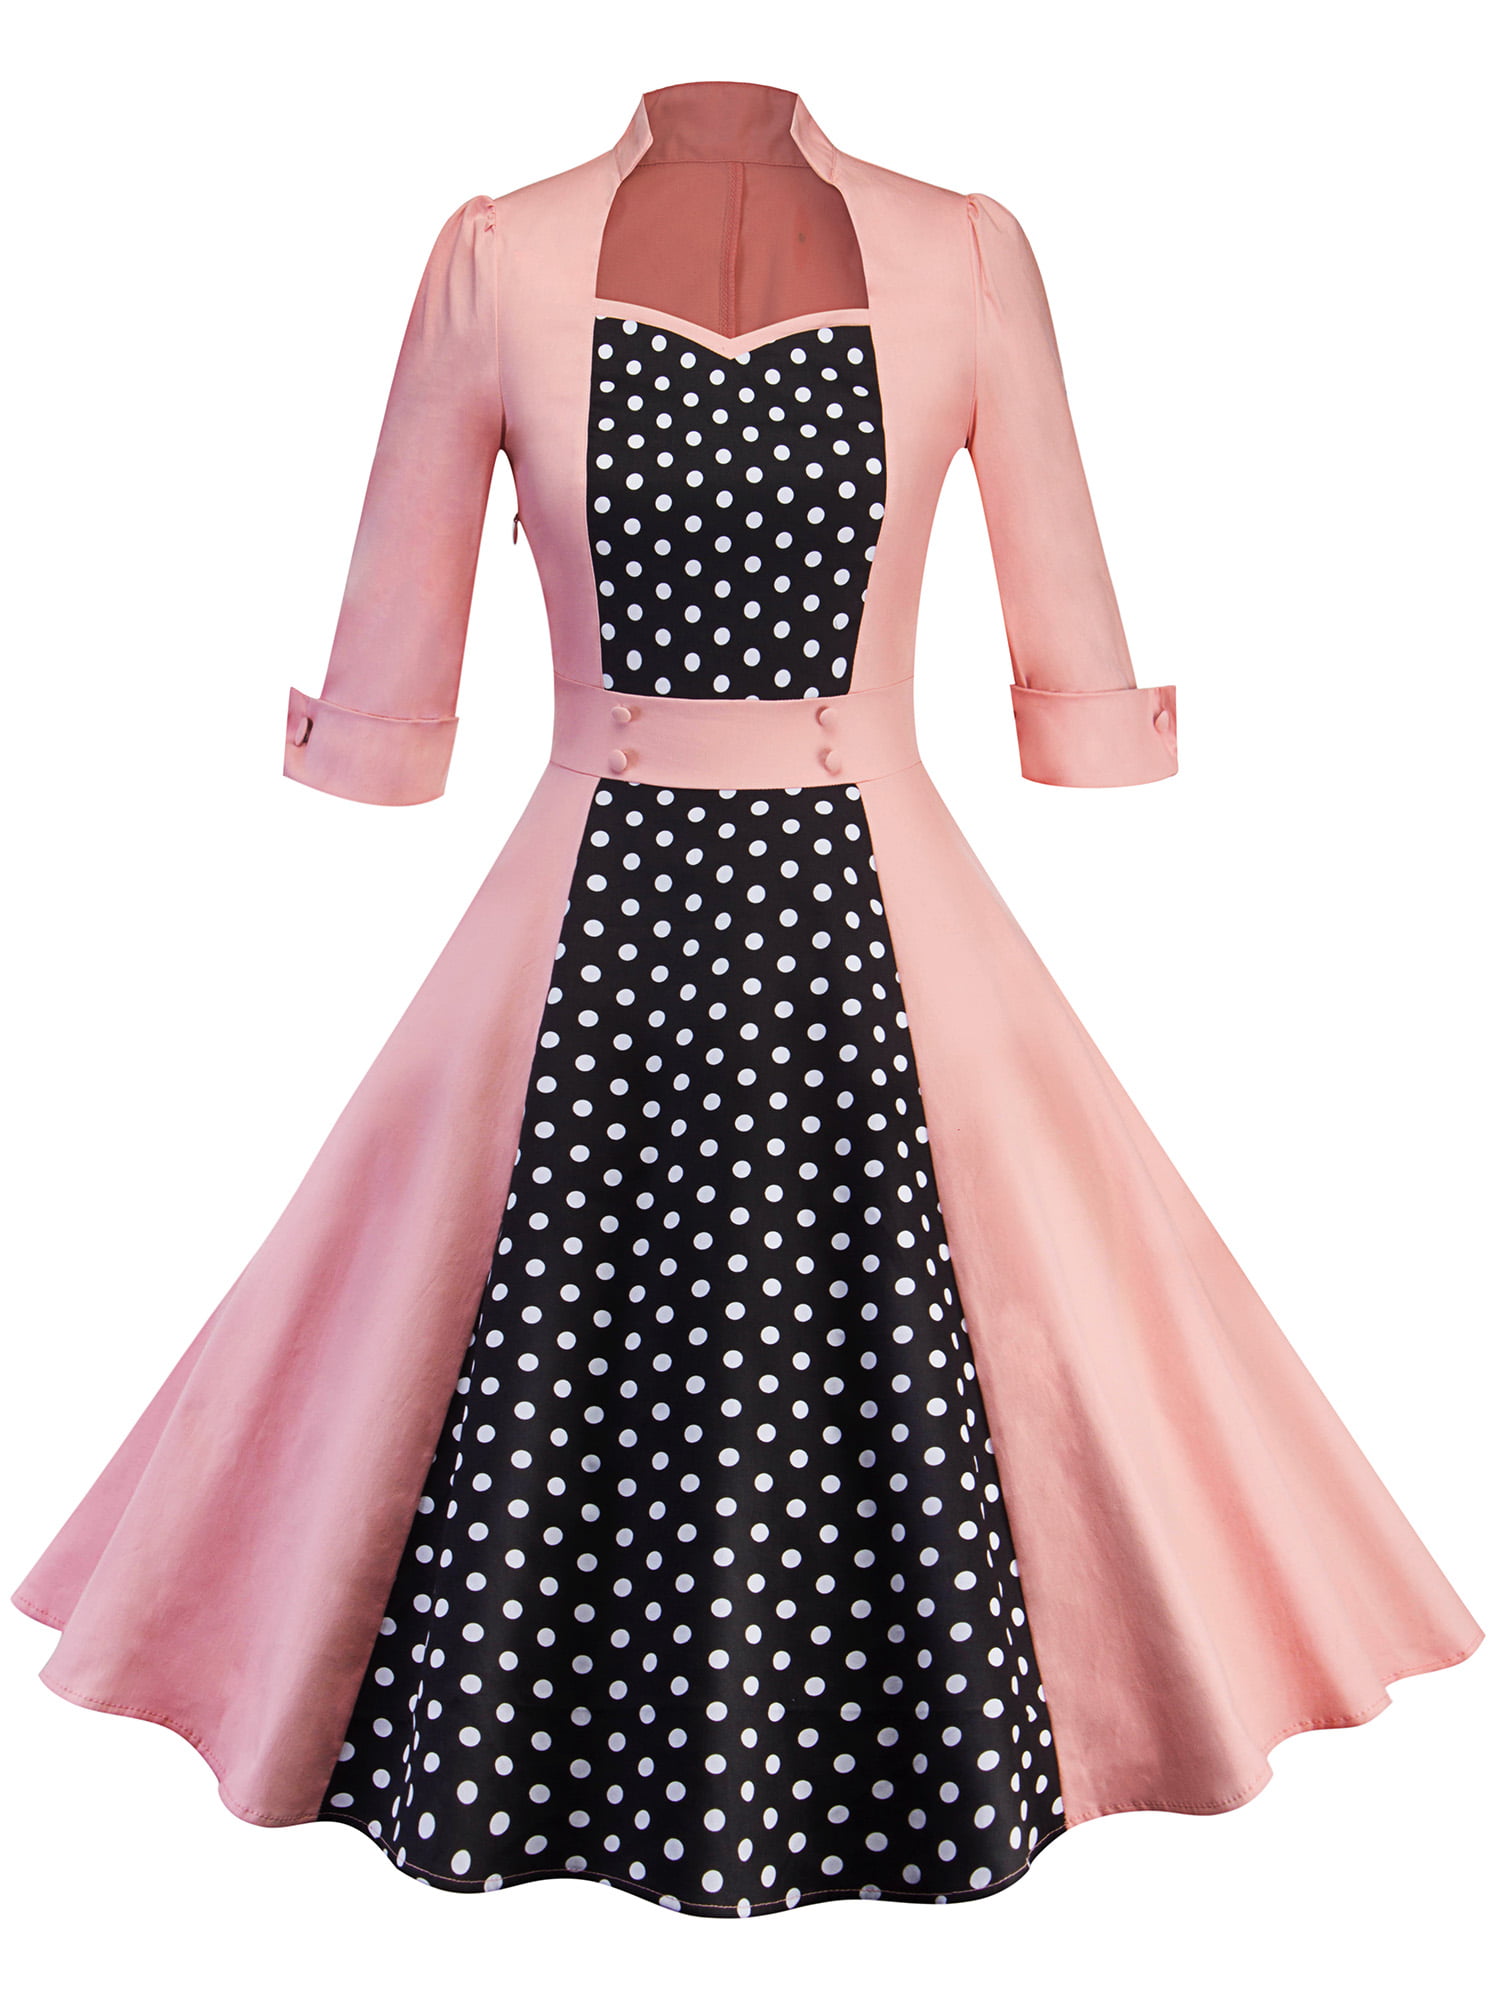 LunaJany Womens Rockabilly Vintage Polka Dot Fit and Flare Swing Cocktail Dress 